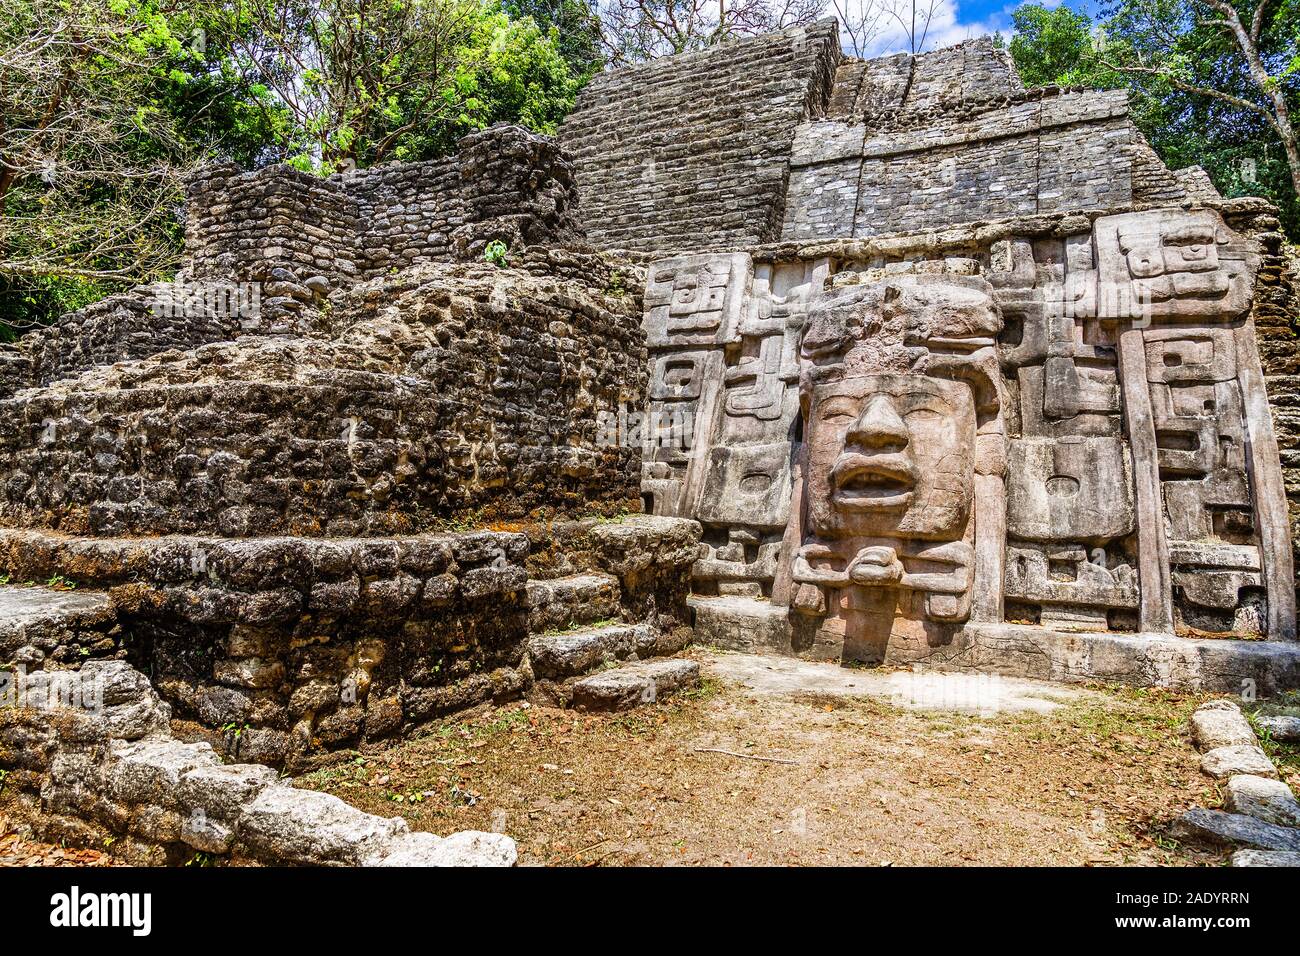 Old ancient stone Mayan pre-columbian civilization pyramid with carved face and ornament hidden in the forest, Lamanai archeological site, Orange Walk Stock Photo